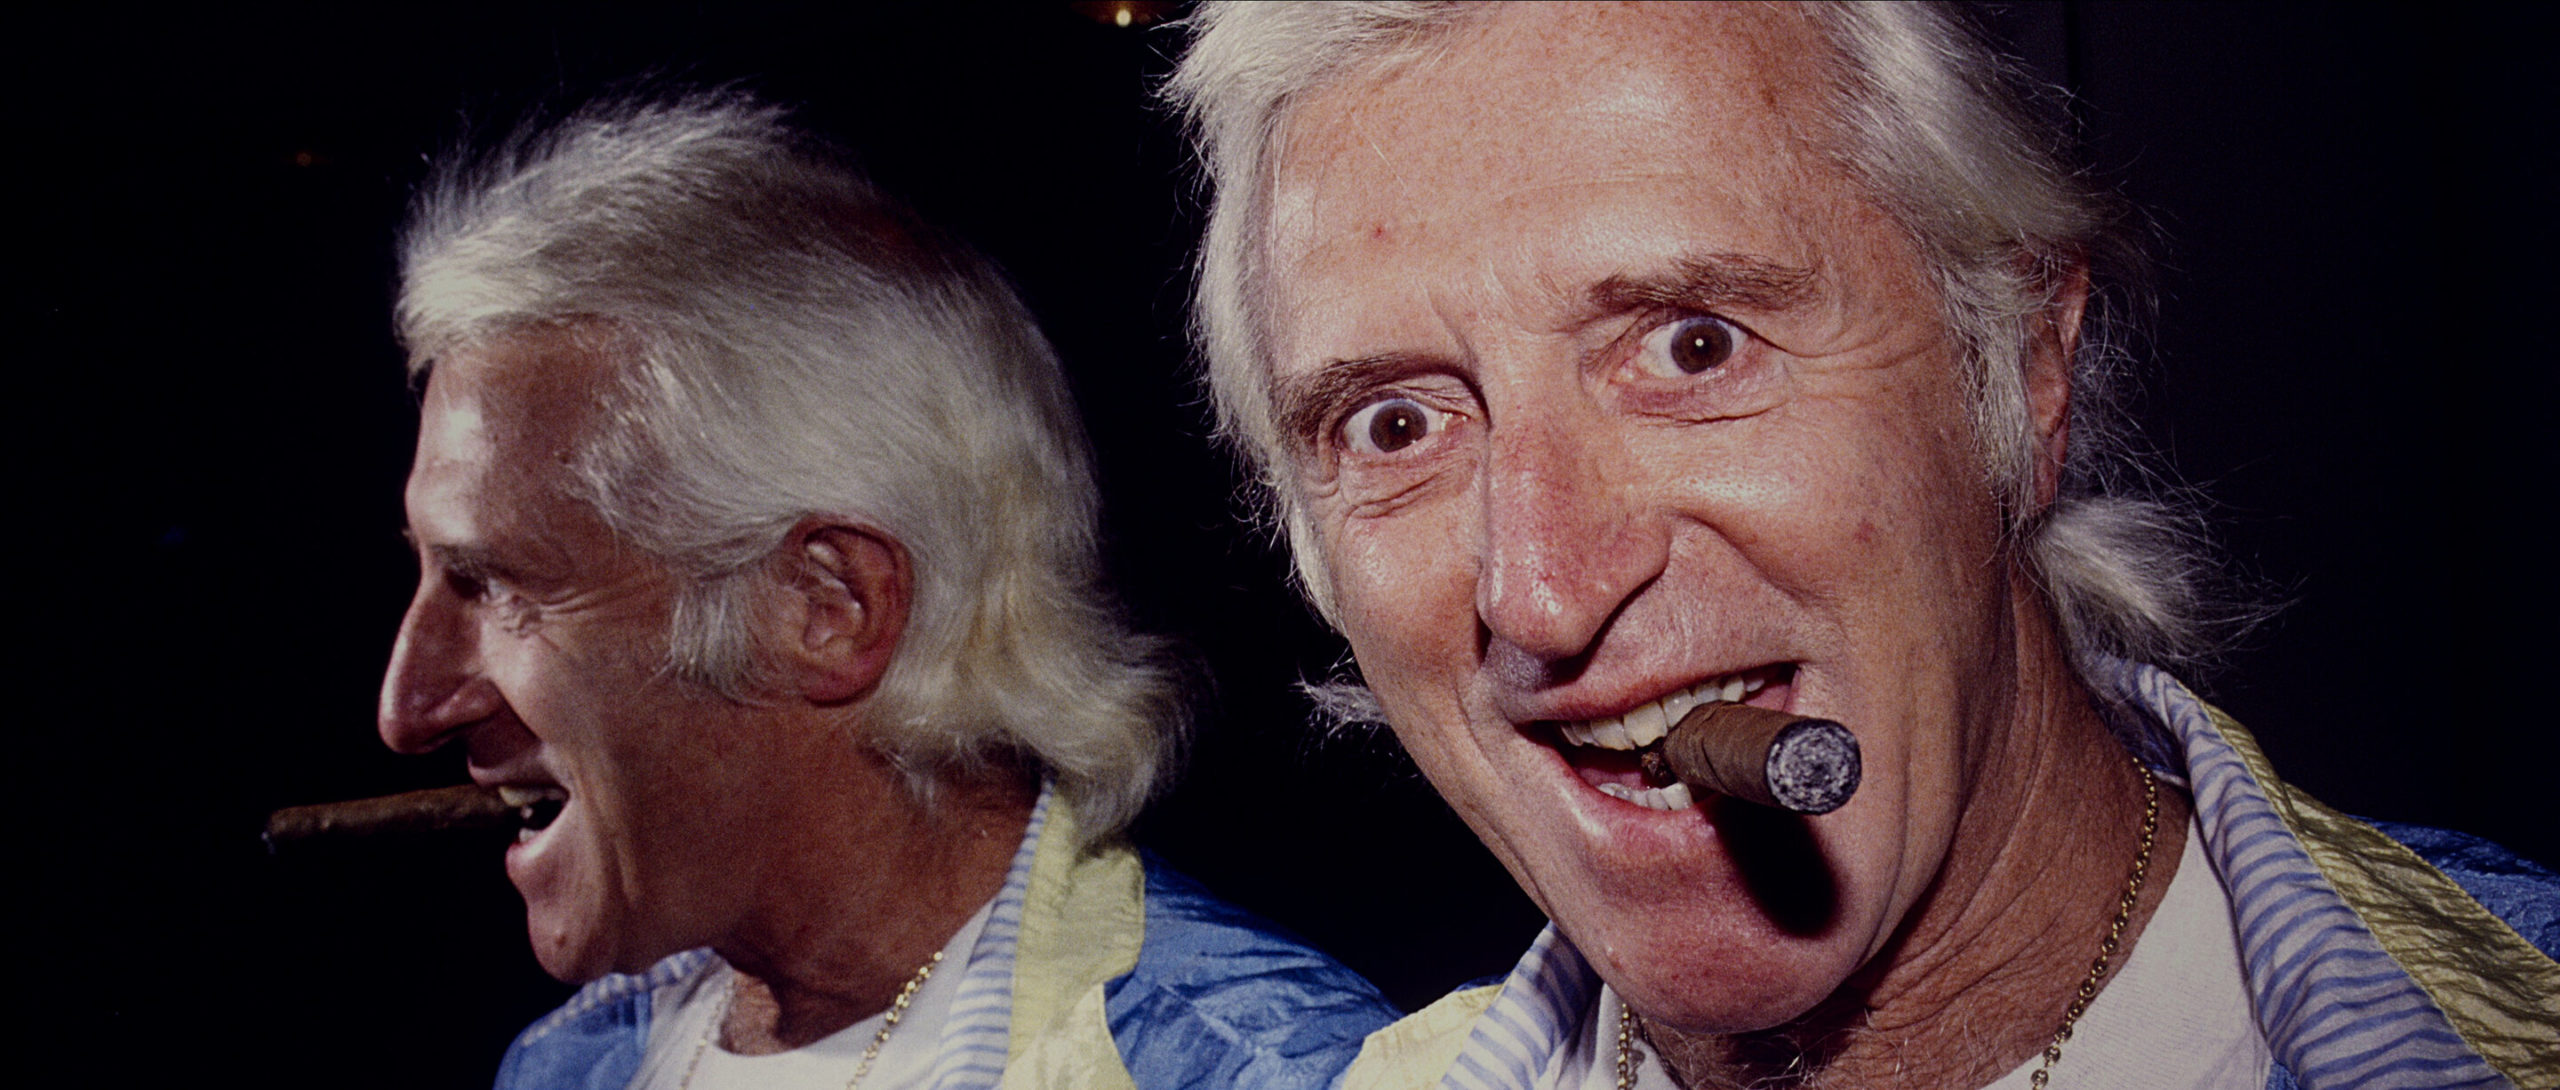 Netflix’s true-crime docuseries about Jimmy Savile is shocking viewers